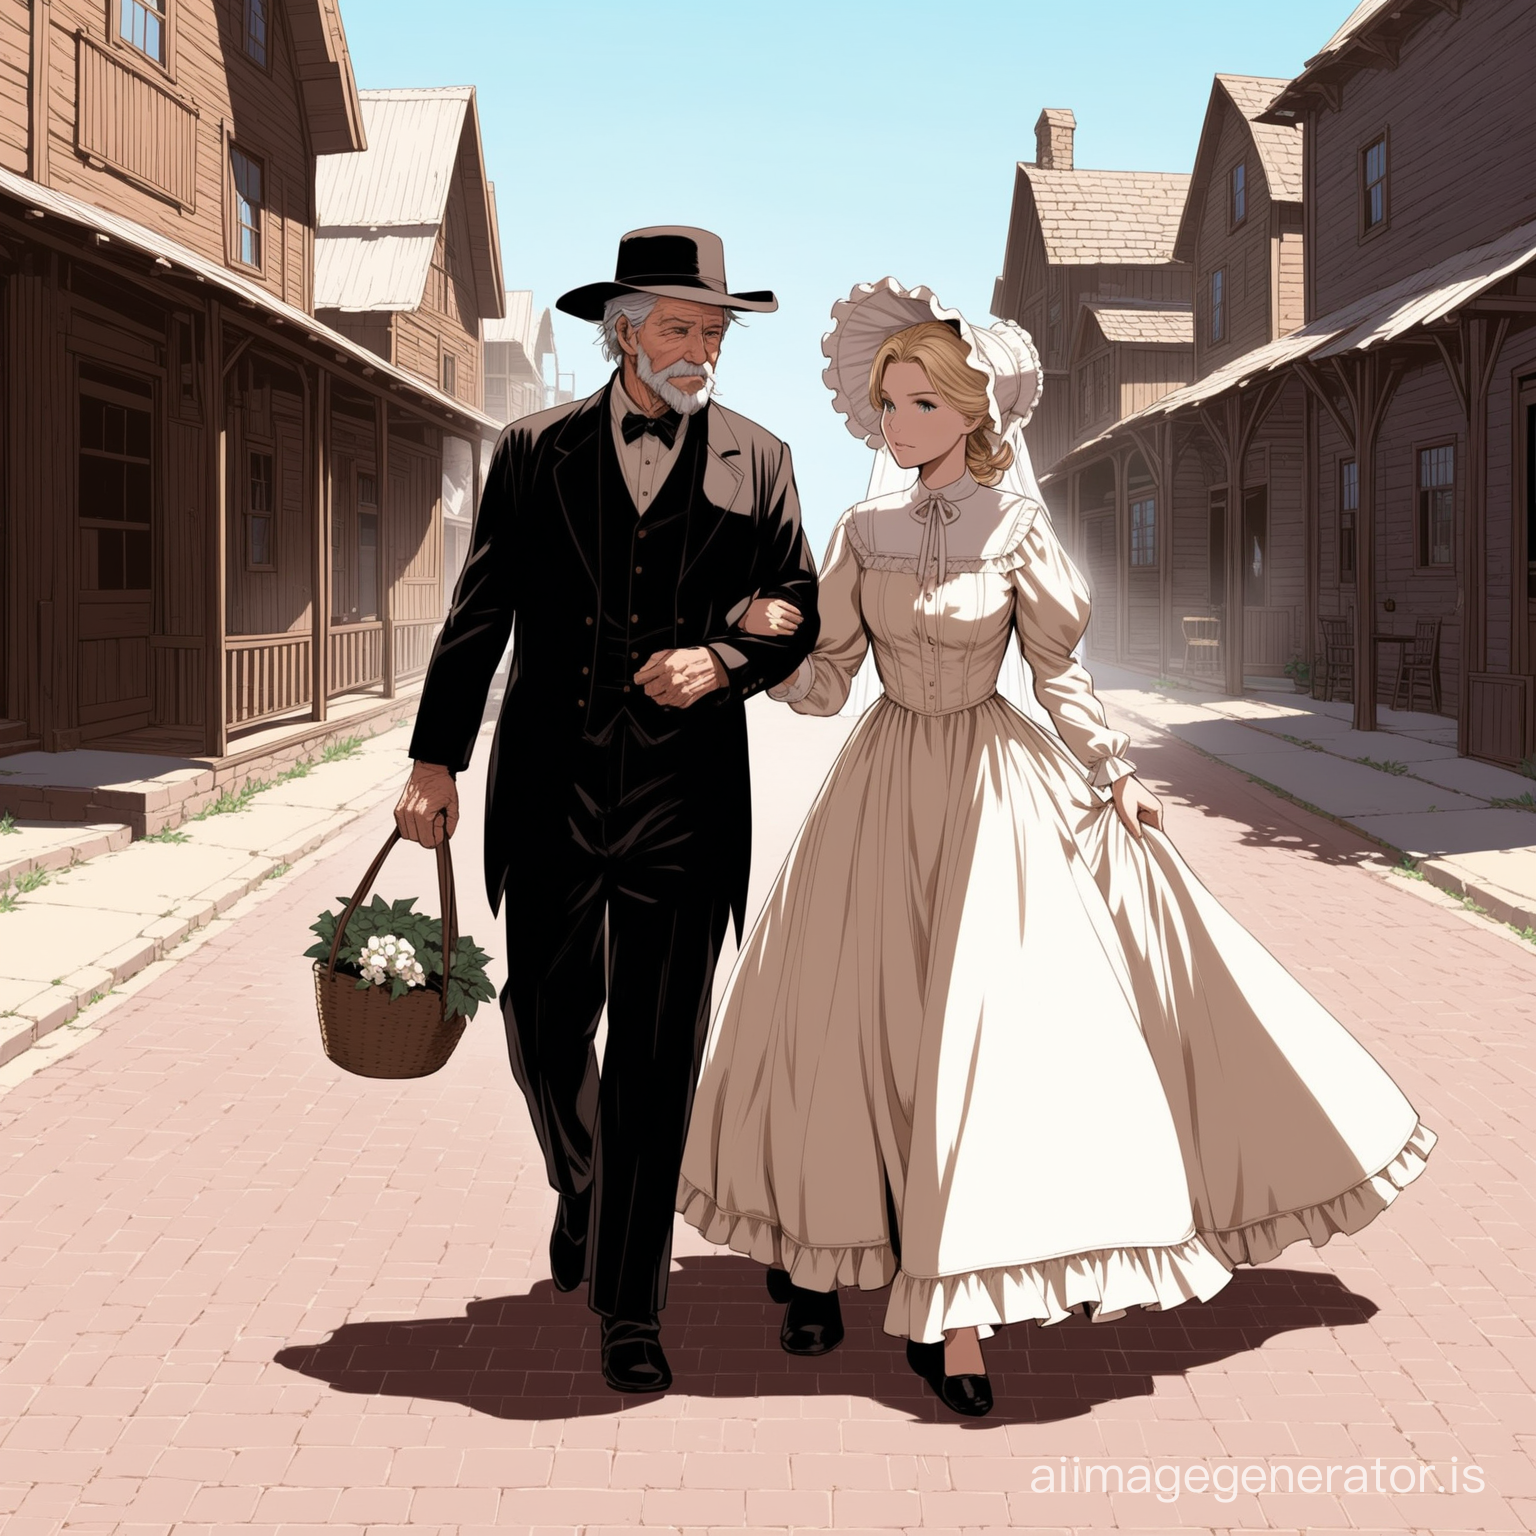 Susan Storm from the FF4 wearing a calicot floor-length loose billowing old west poofy modest dress as a farmer's wife with a frilly bonnet walking on a old west era sidewalk with an old man dressed into a black suit who seems to be her newlywed husband